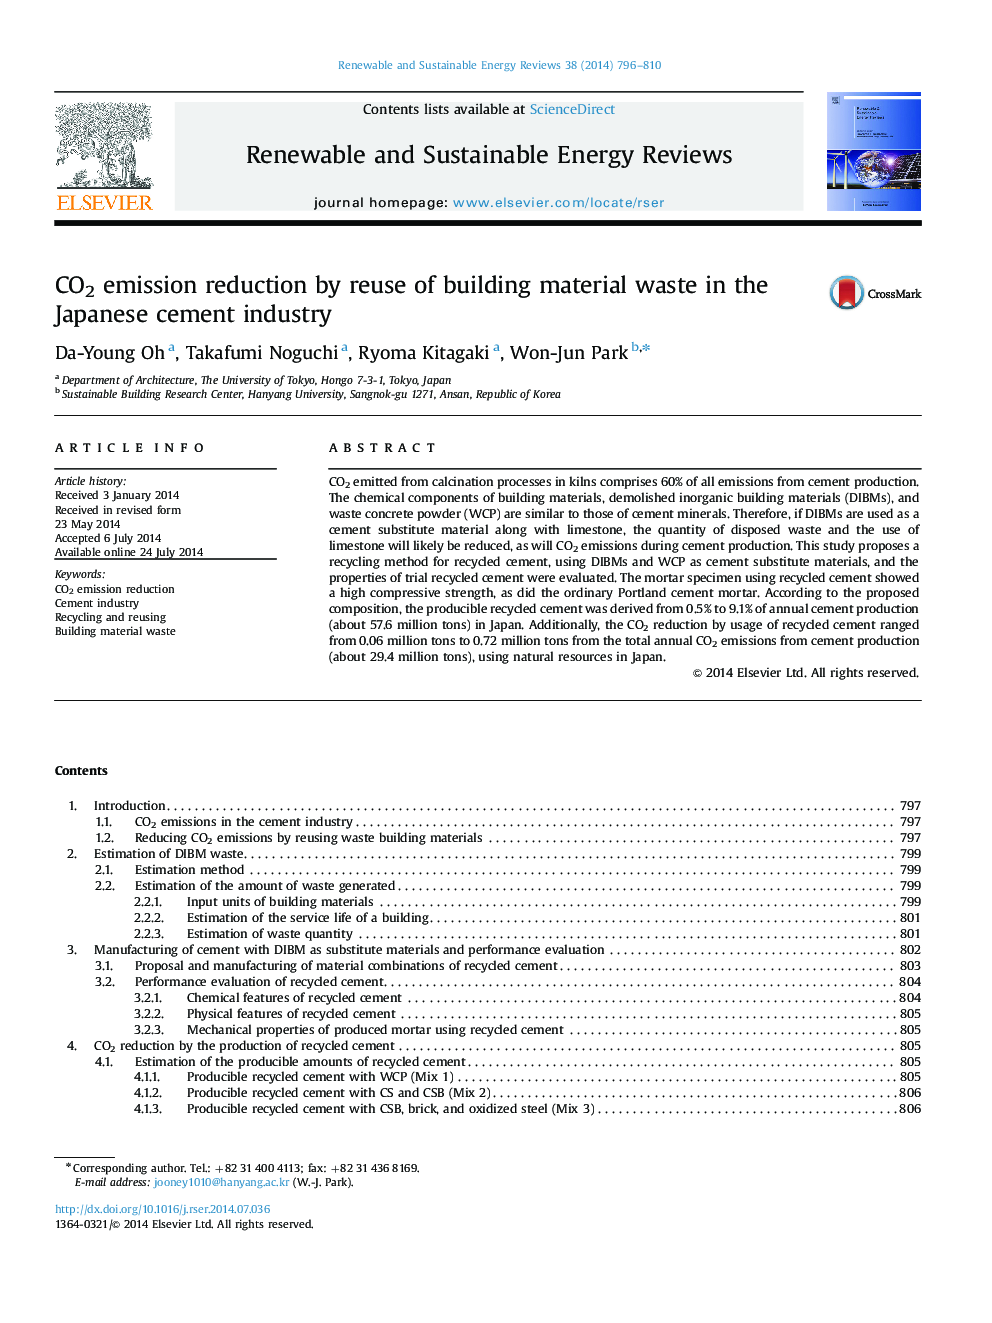 CO2 emission reduction by reuse of building material waste in the Japanese cement industry